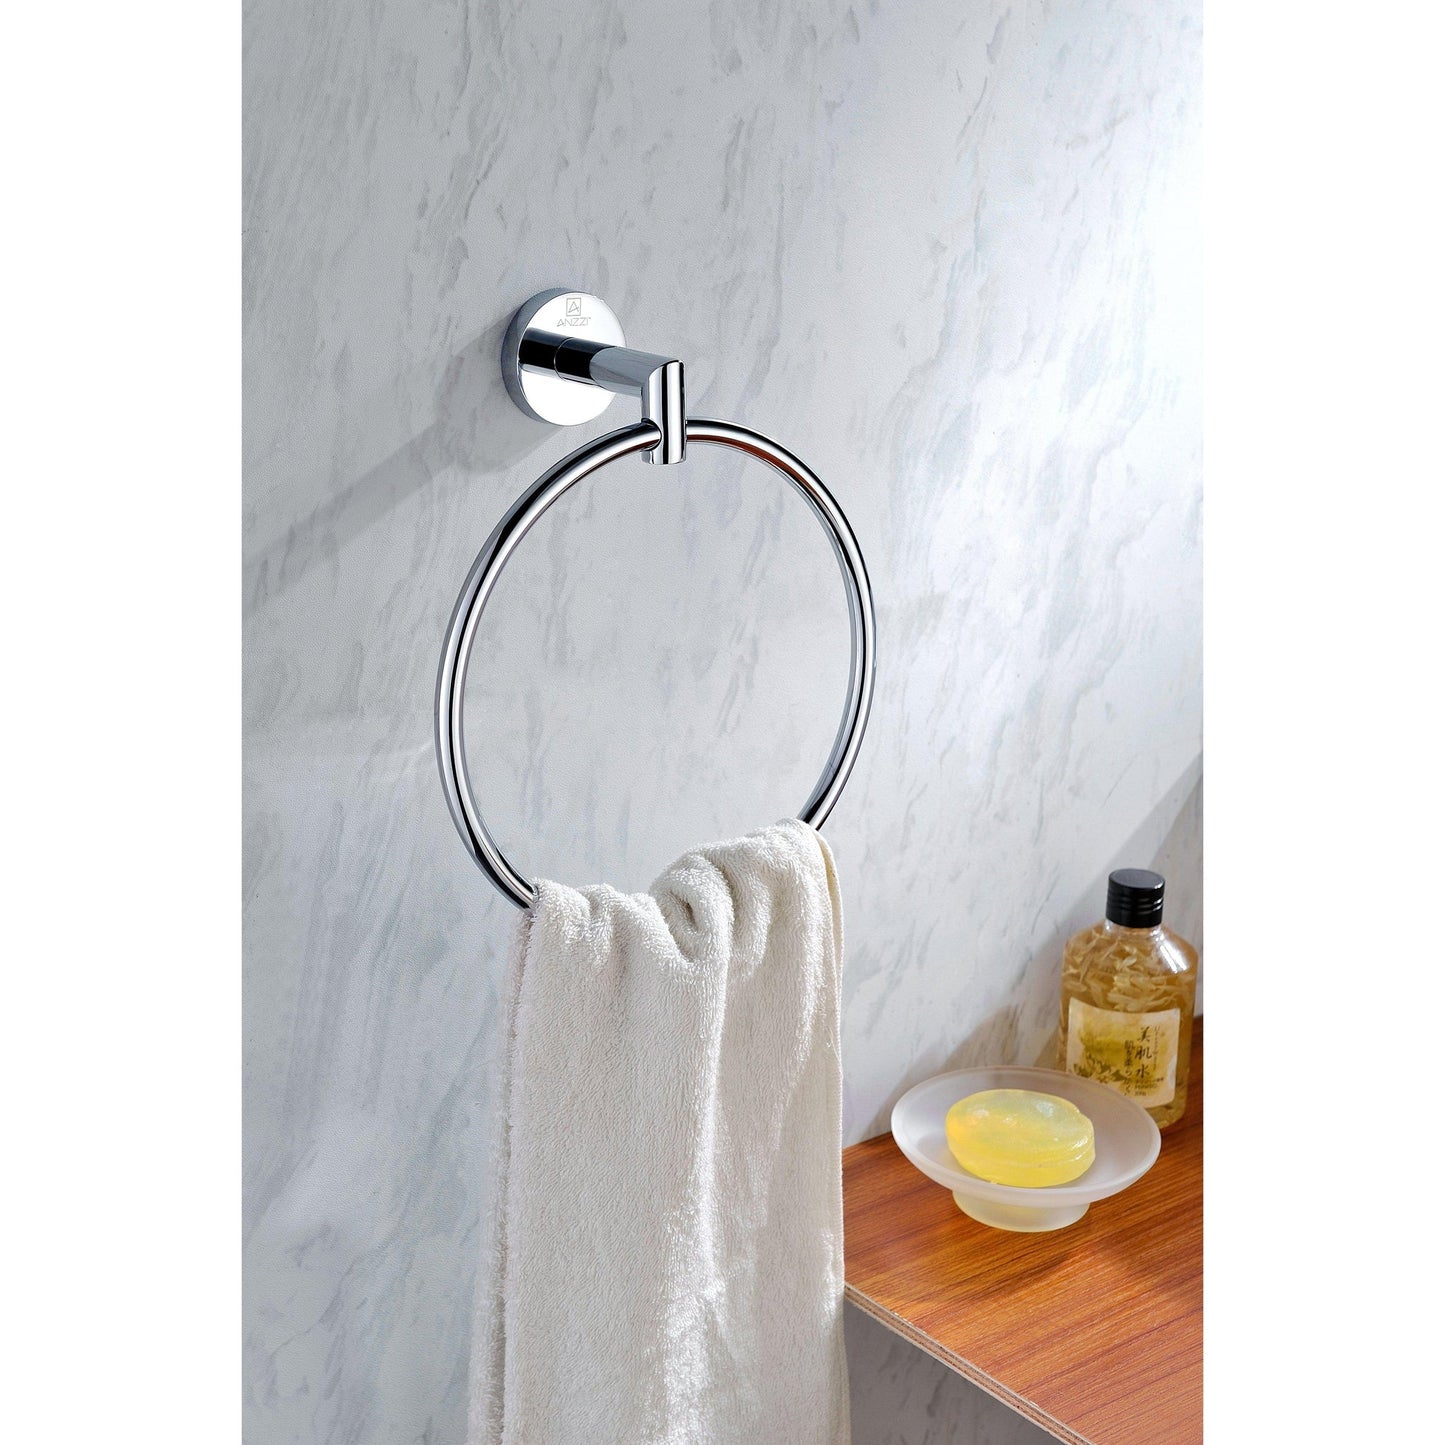 ANZZI Caster 2 Series Wall-Mounted Polished Chrome Single Towel Ring